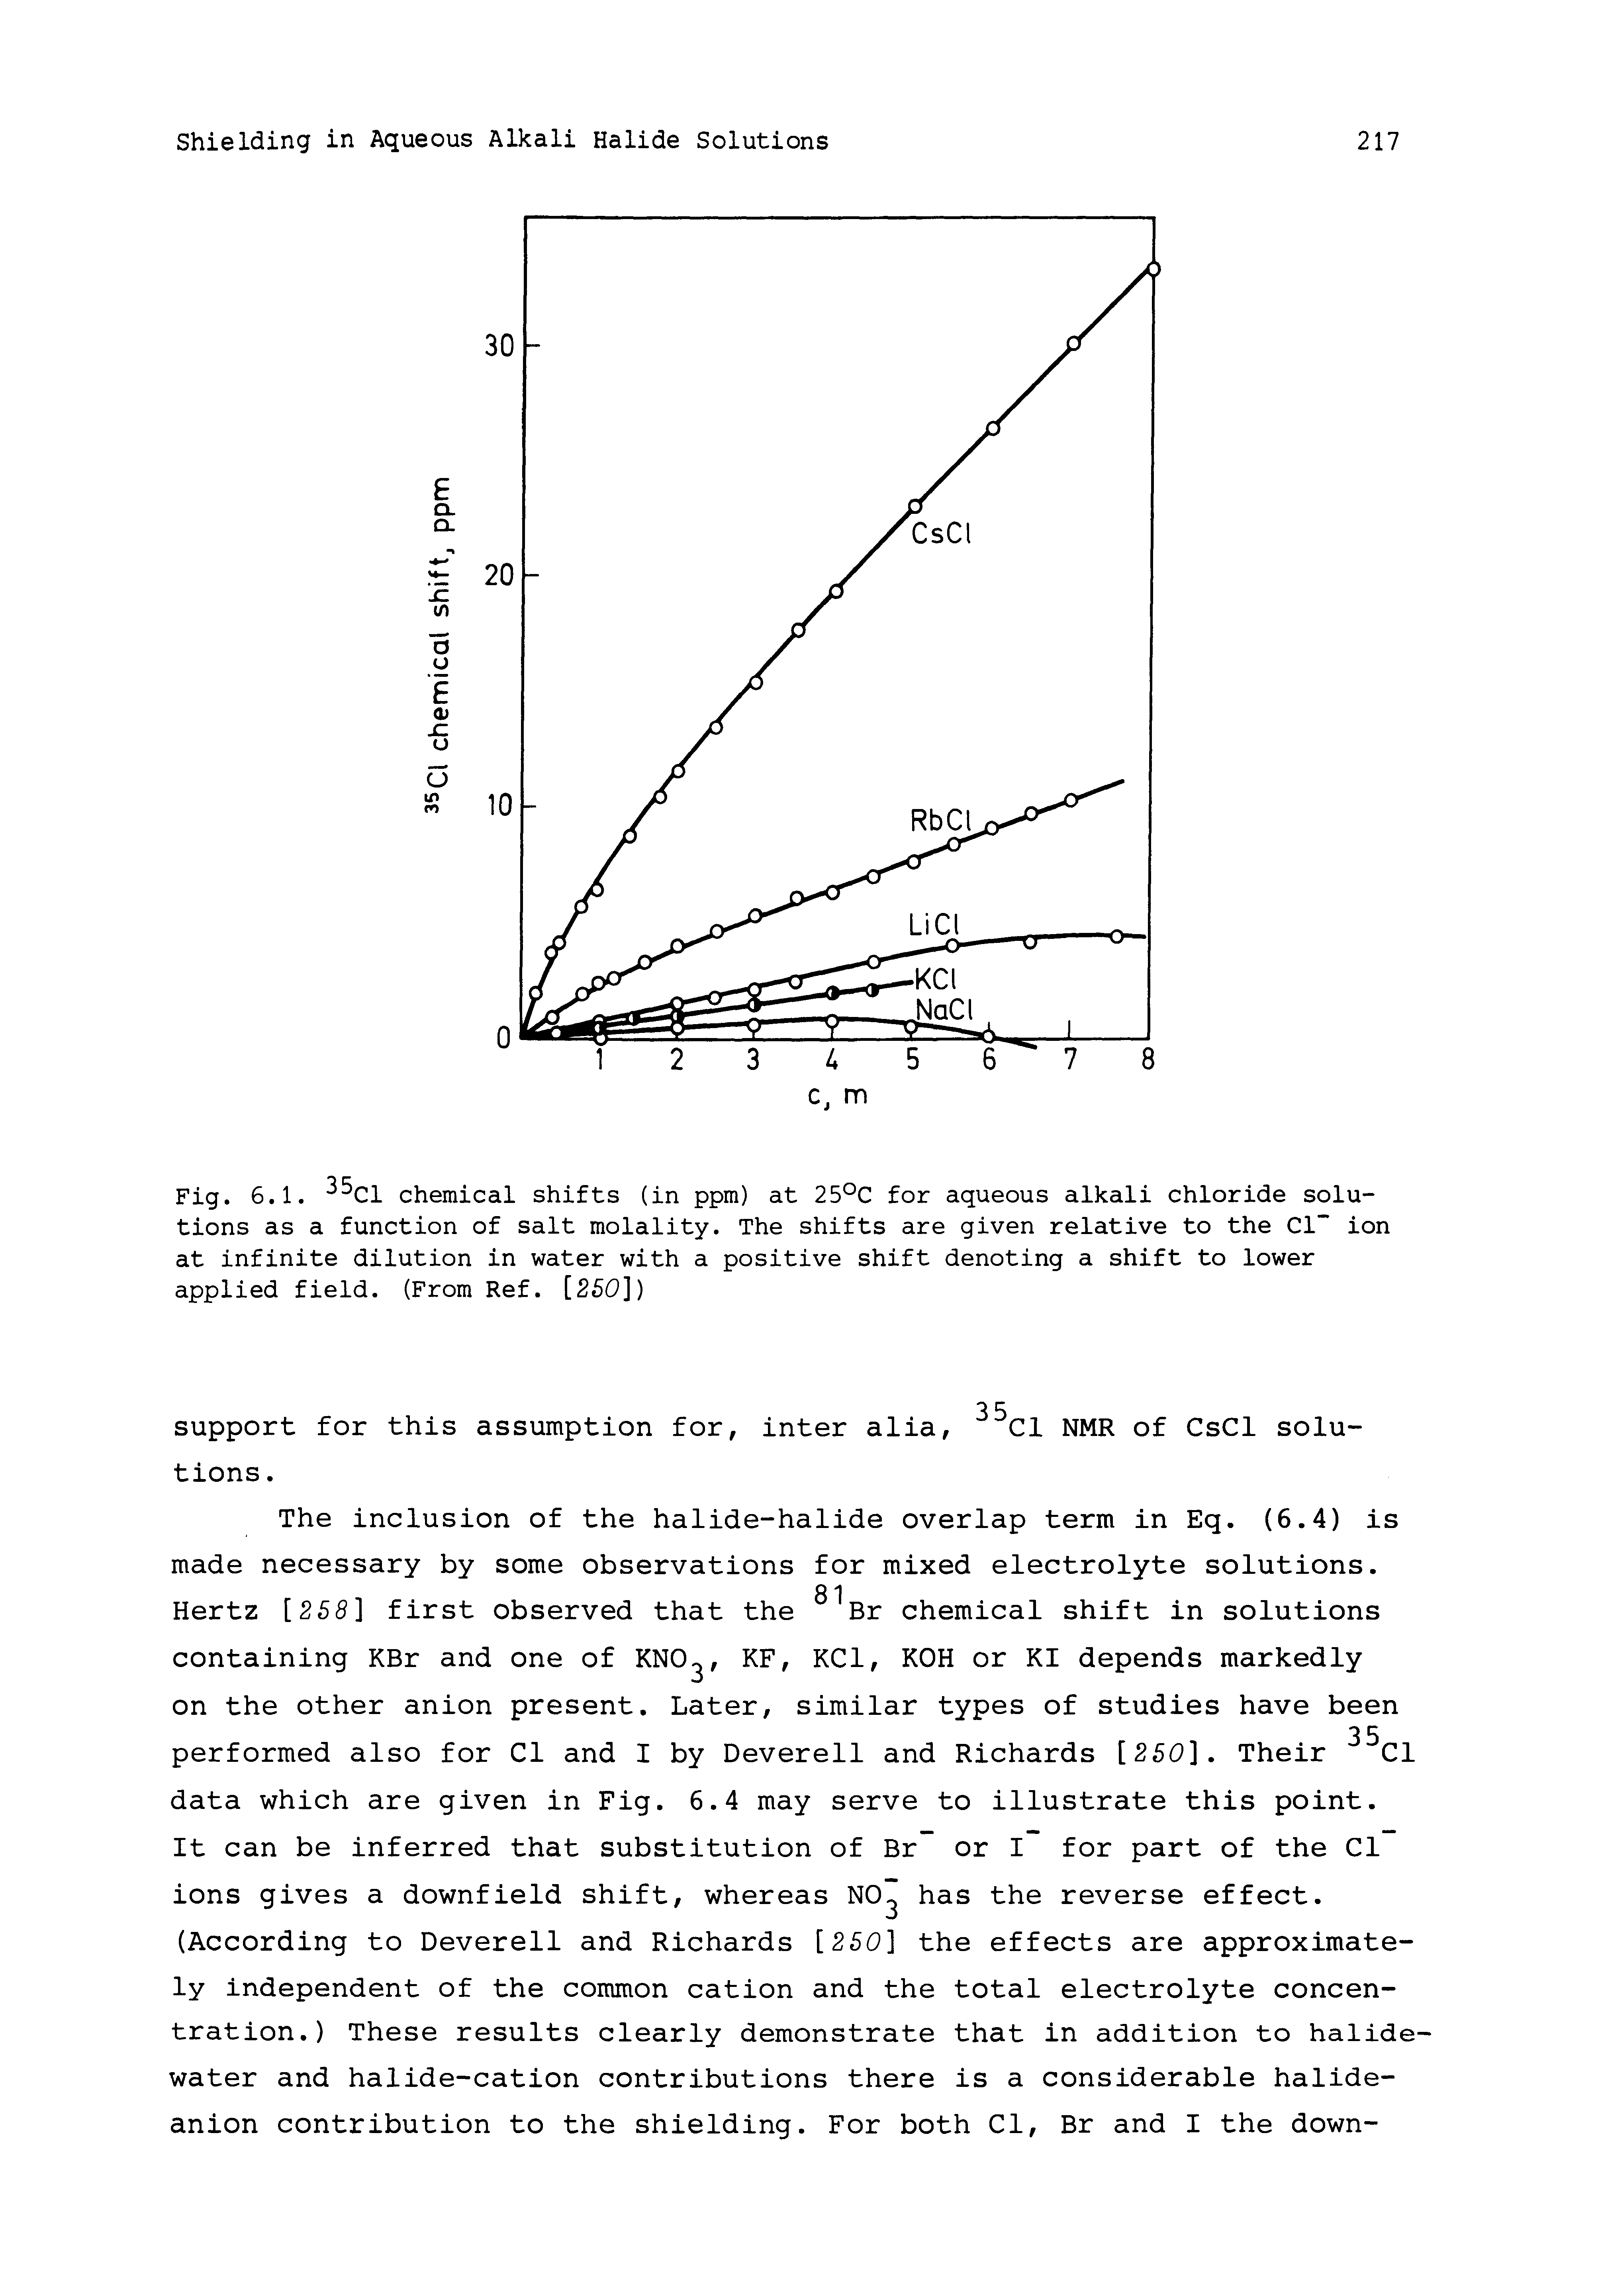 Fig. 6.1. Cl chemical shifts (in ppm) at 25°C for aqueous alkali chloride solutions as a function of salt molality. The shifts are given relative to the Cl" ion at infinite dilution in water with a positive shift denoting a shift to lower applied field. (From Ref. [2S0])...